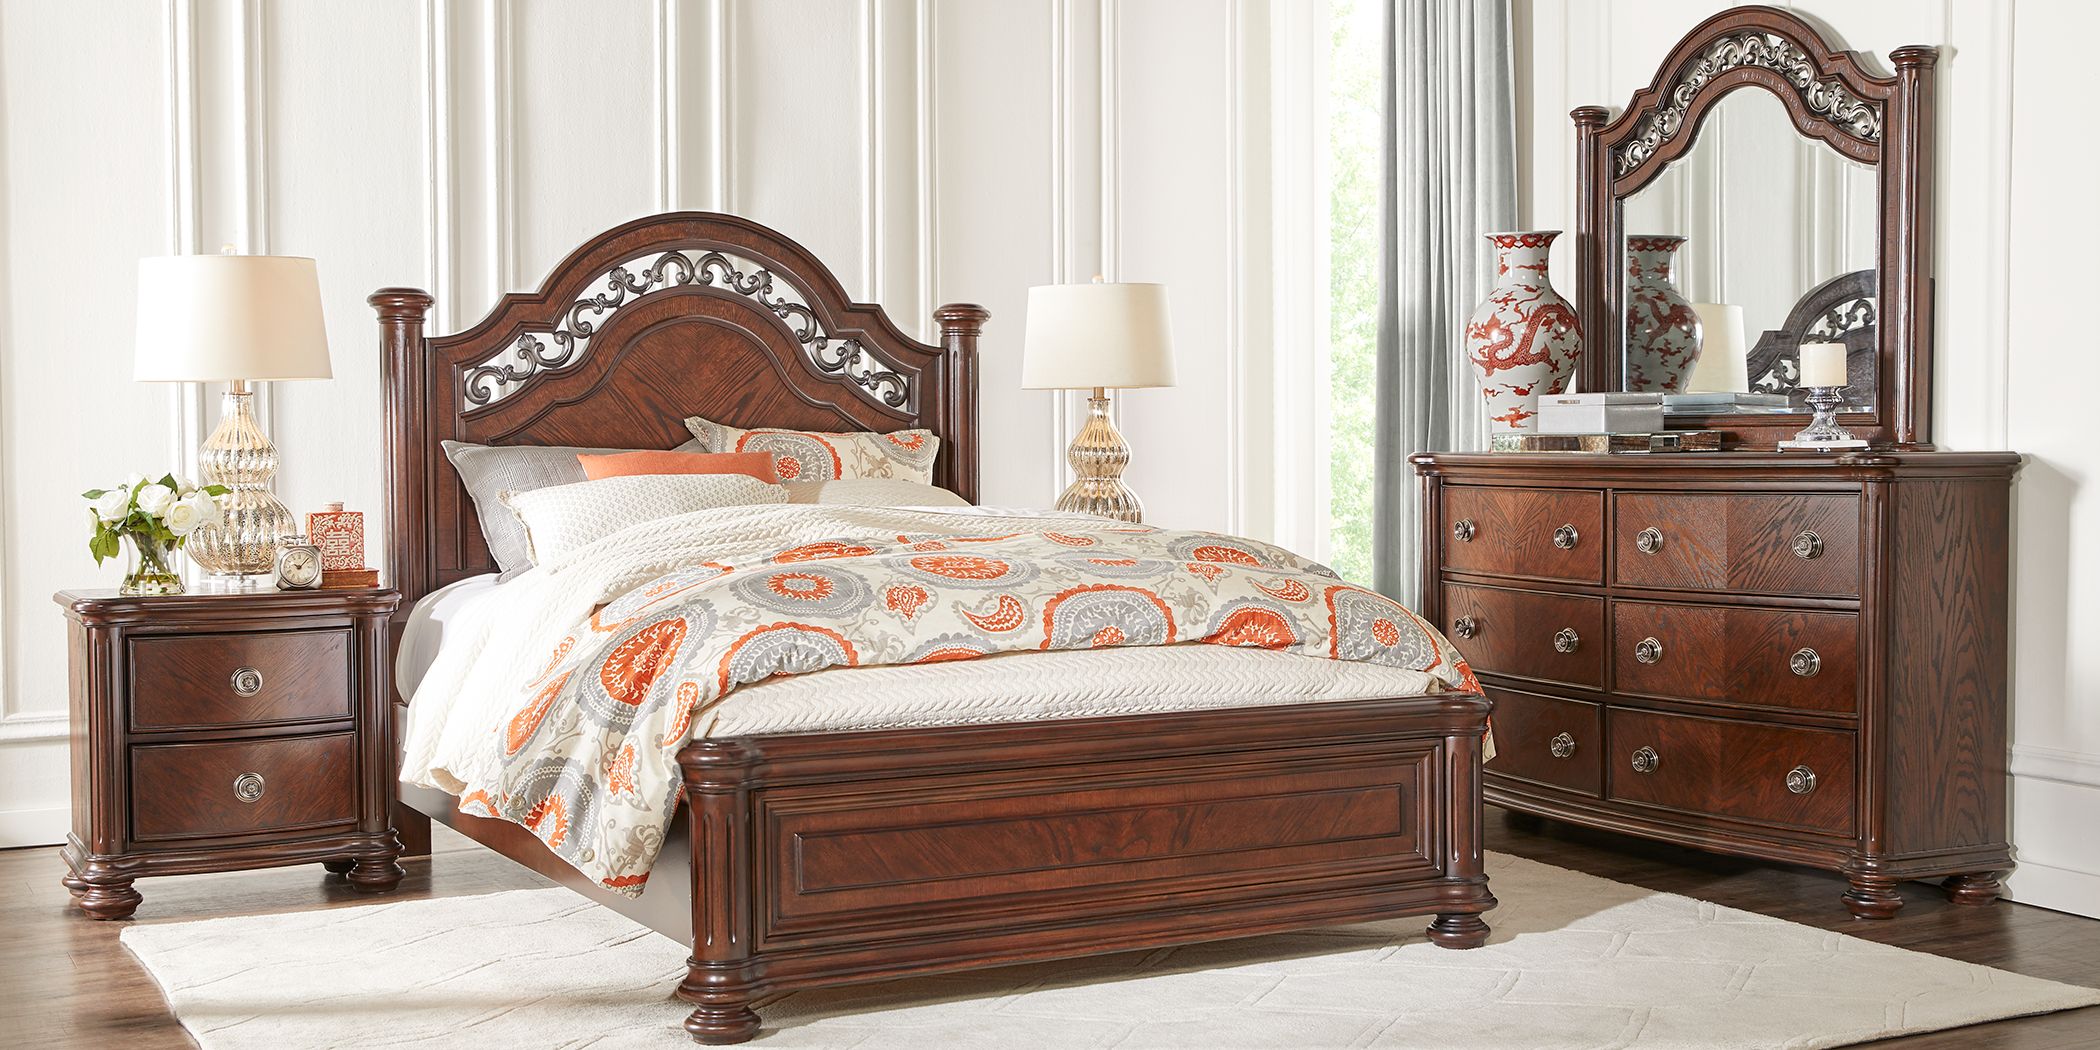 Discount Bedroom Furniture Rooms To Go Outlet